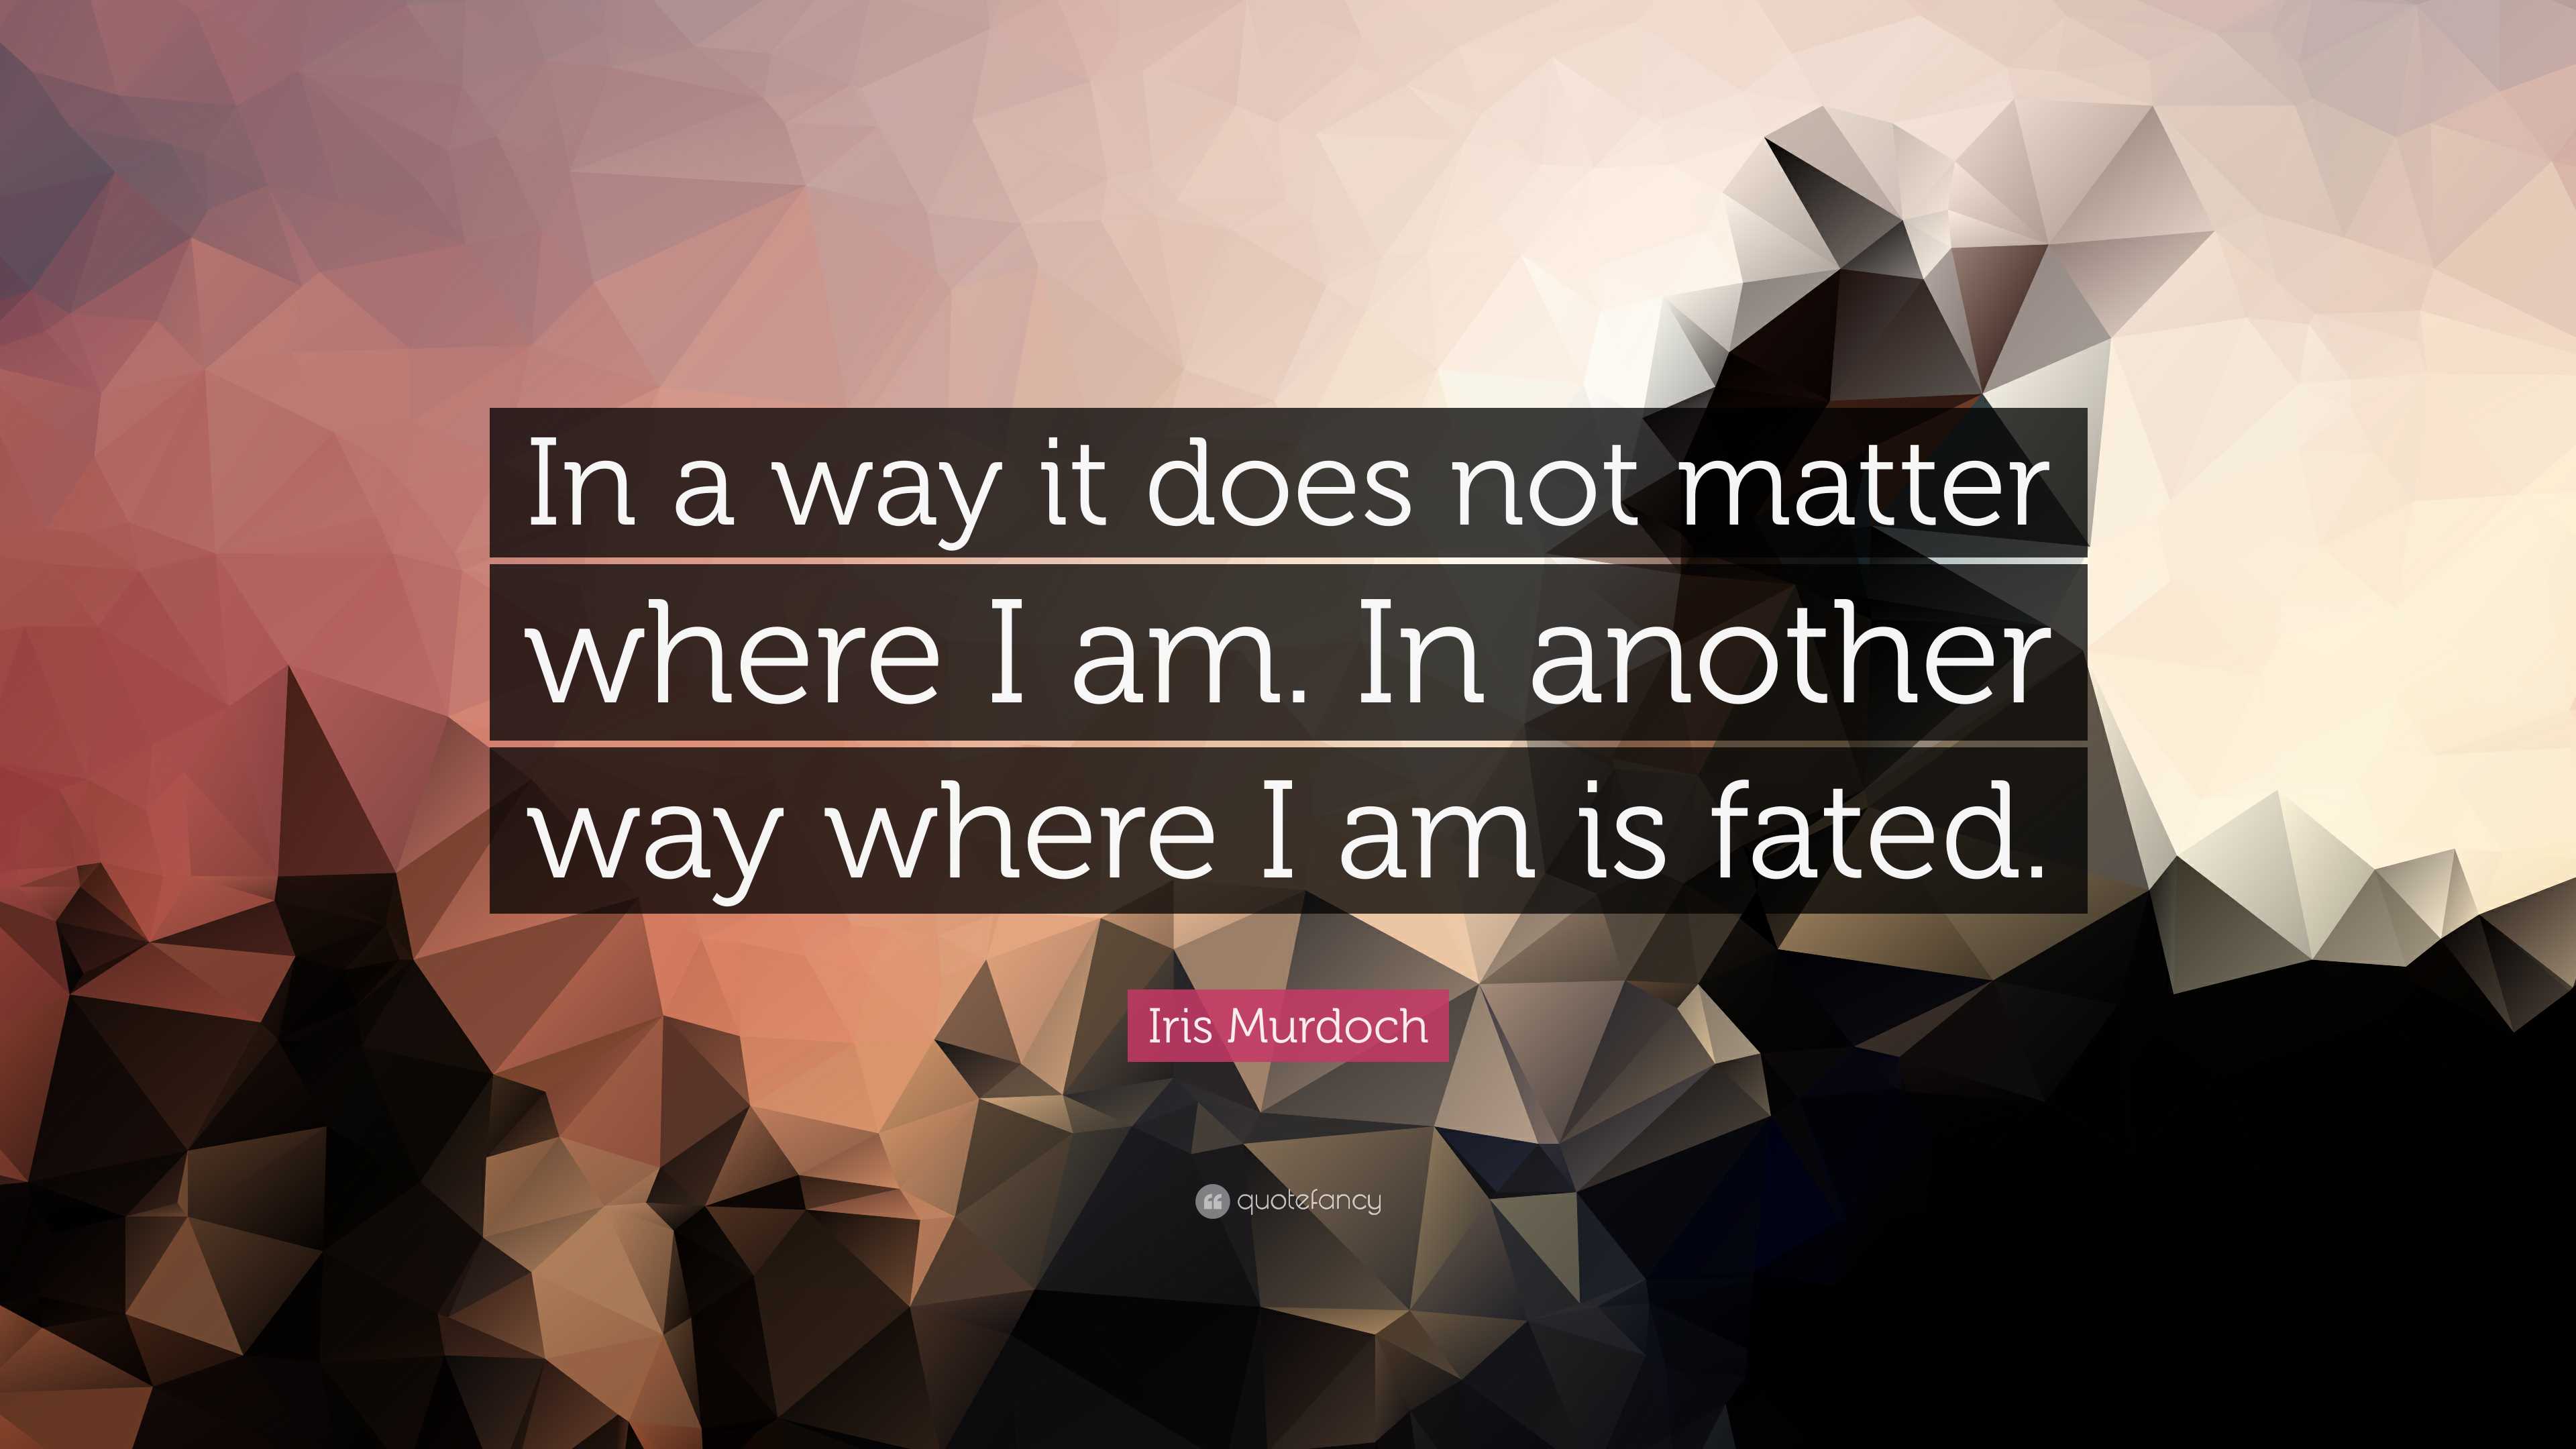 Iris Murdoch Quote “in A Way It Does Not Matter Where I Am In Another